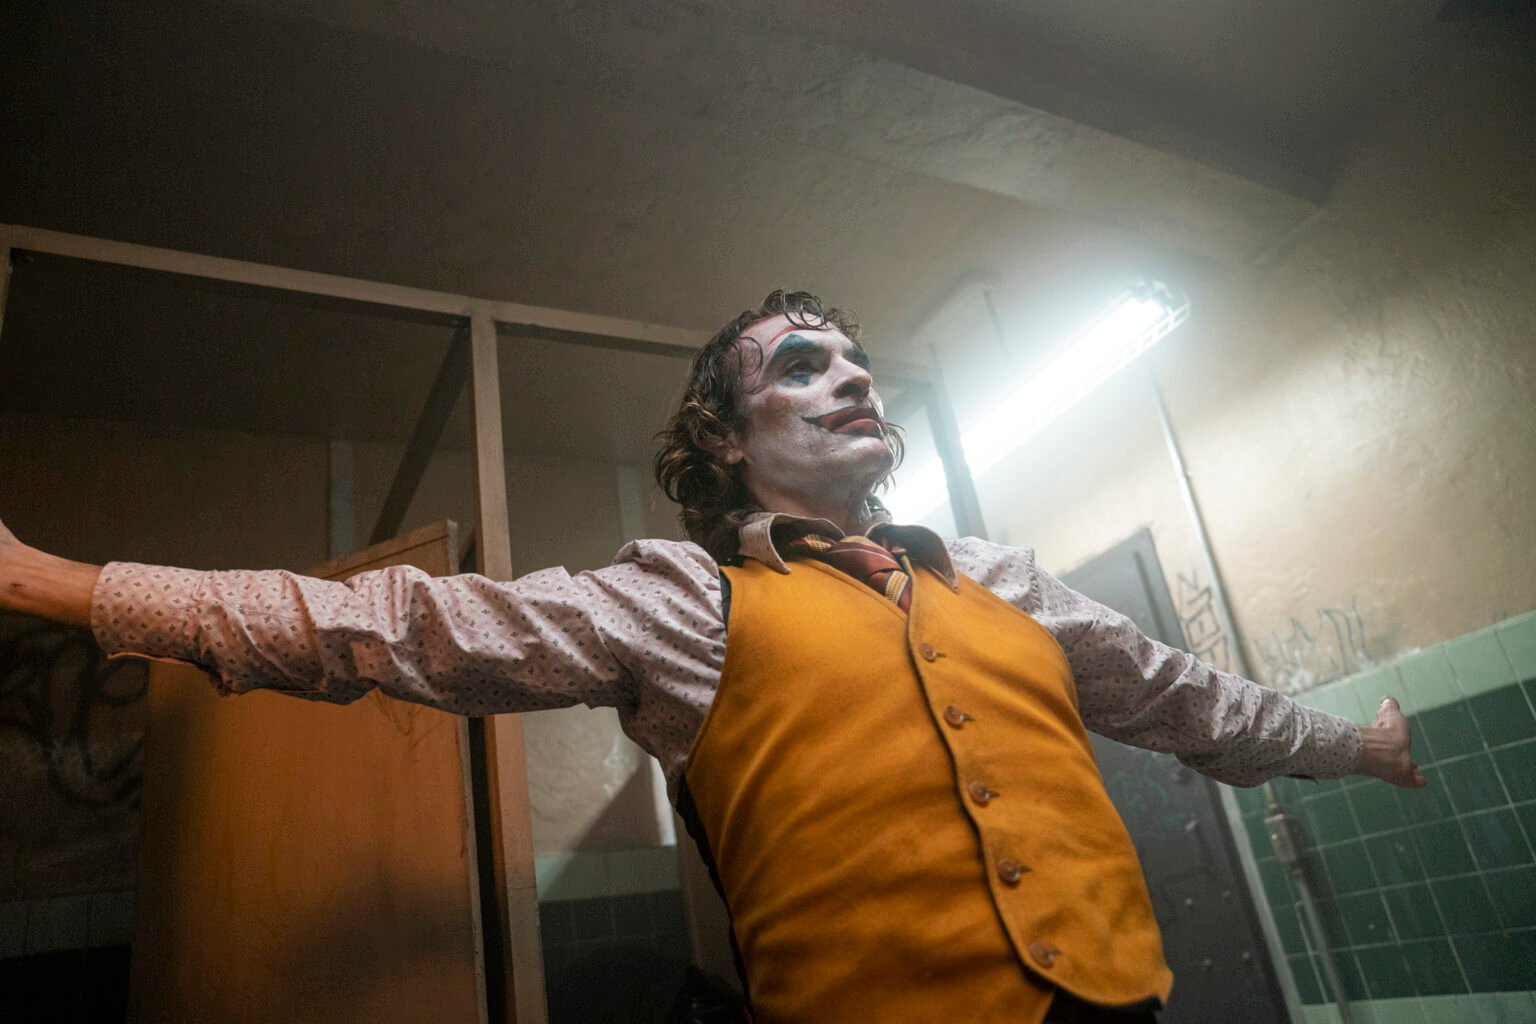 Did you love Joaquin Phoenix in 'Joker' back in 2019? Let’s take a look at all the details we have so far on the sequel 'Joker 2' here.